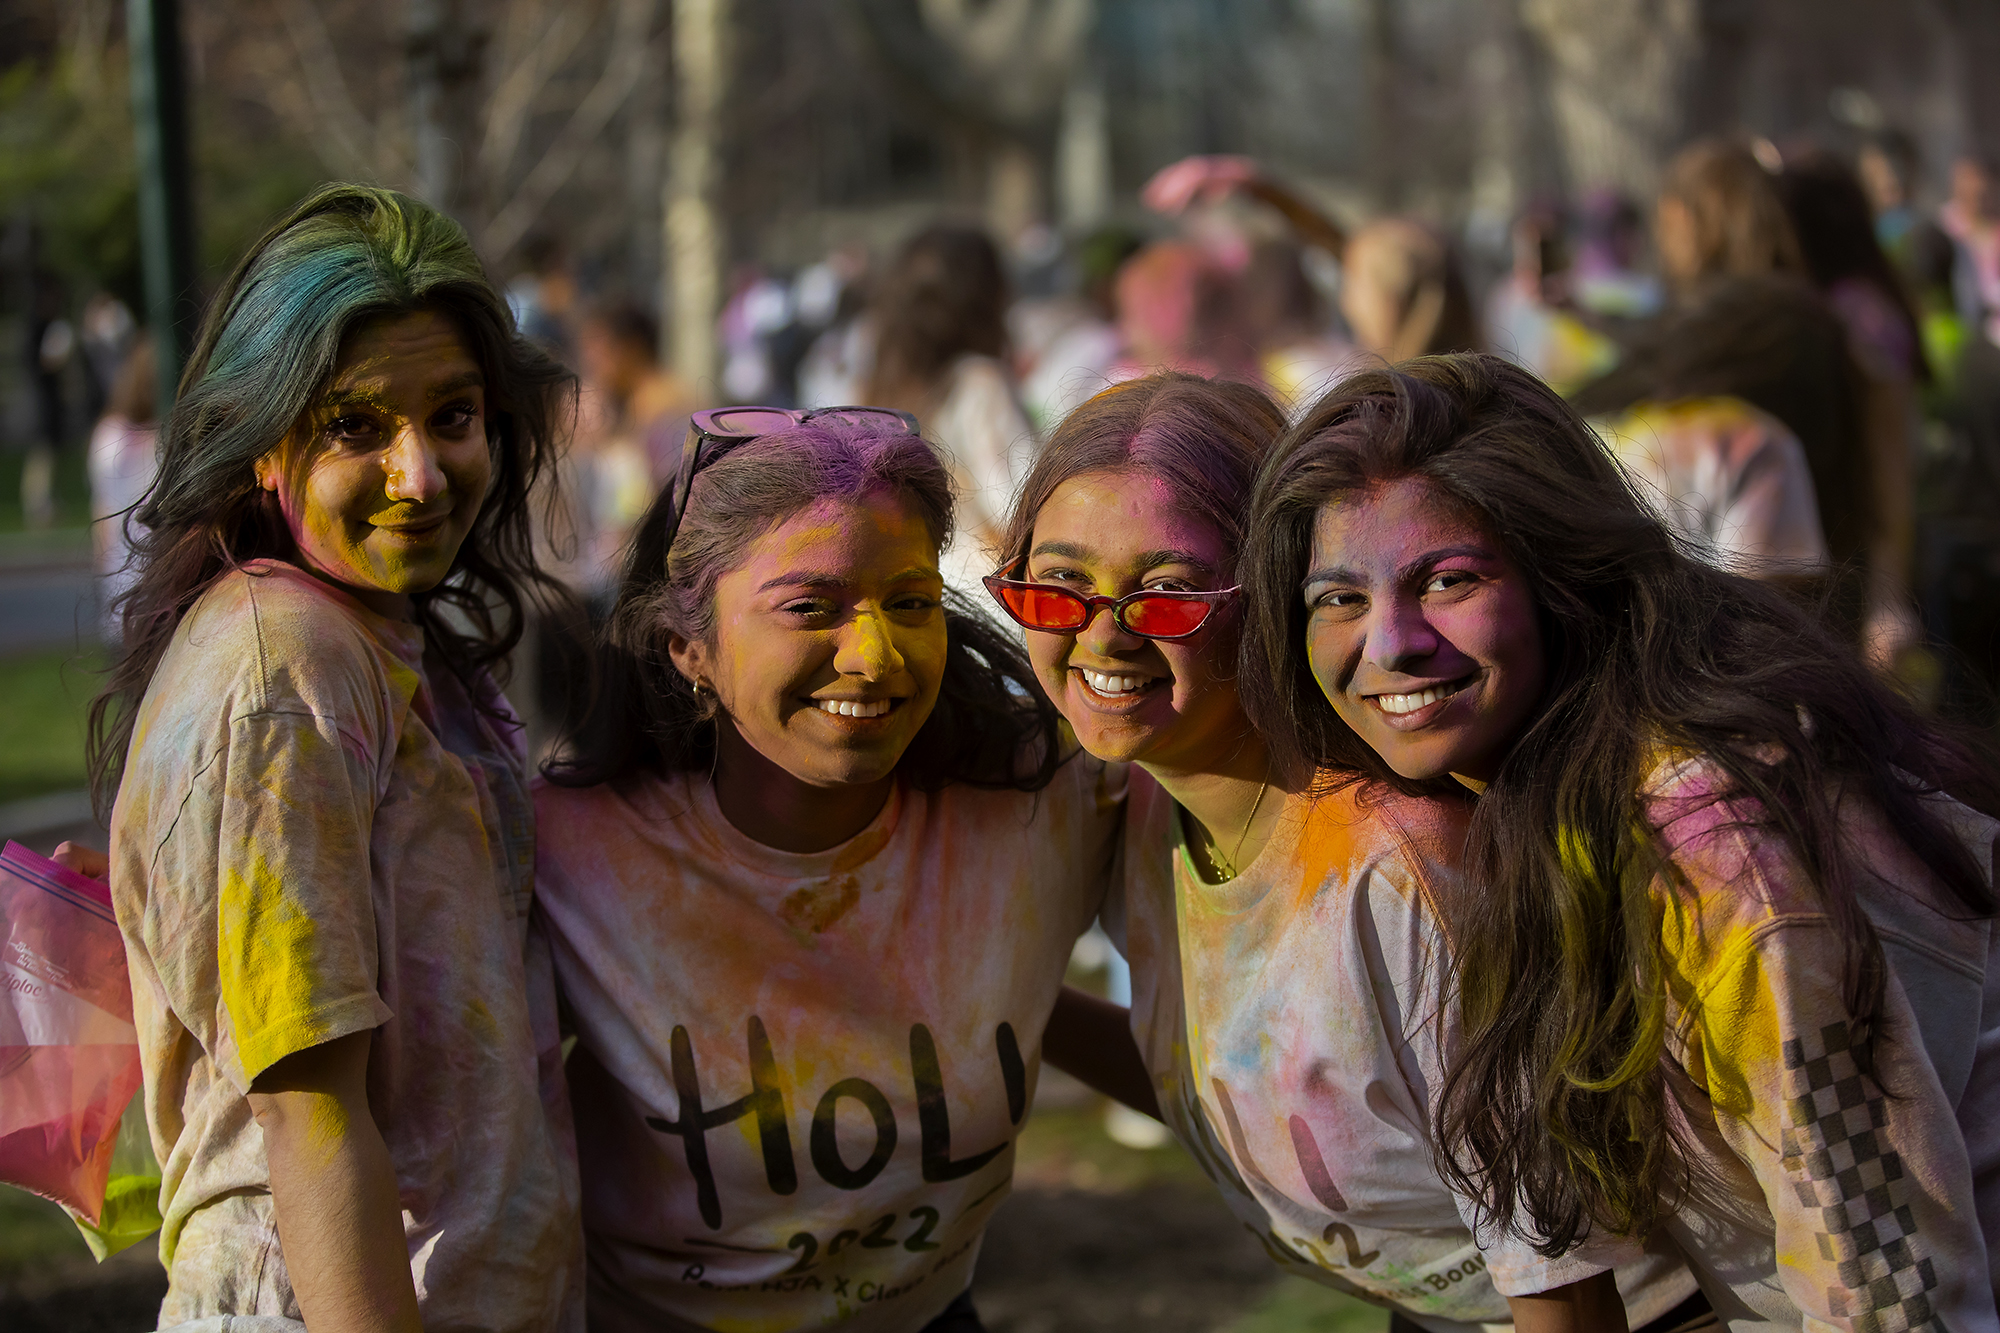 Four people on College Green covered in colorful powder celebrating Holi.